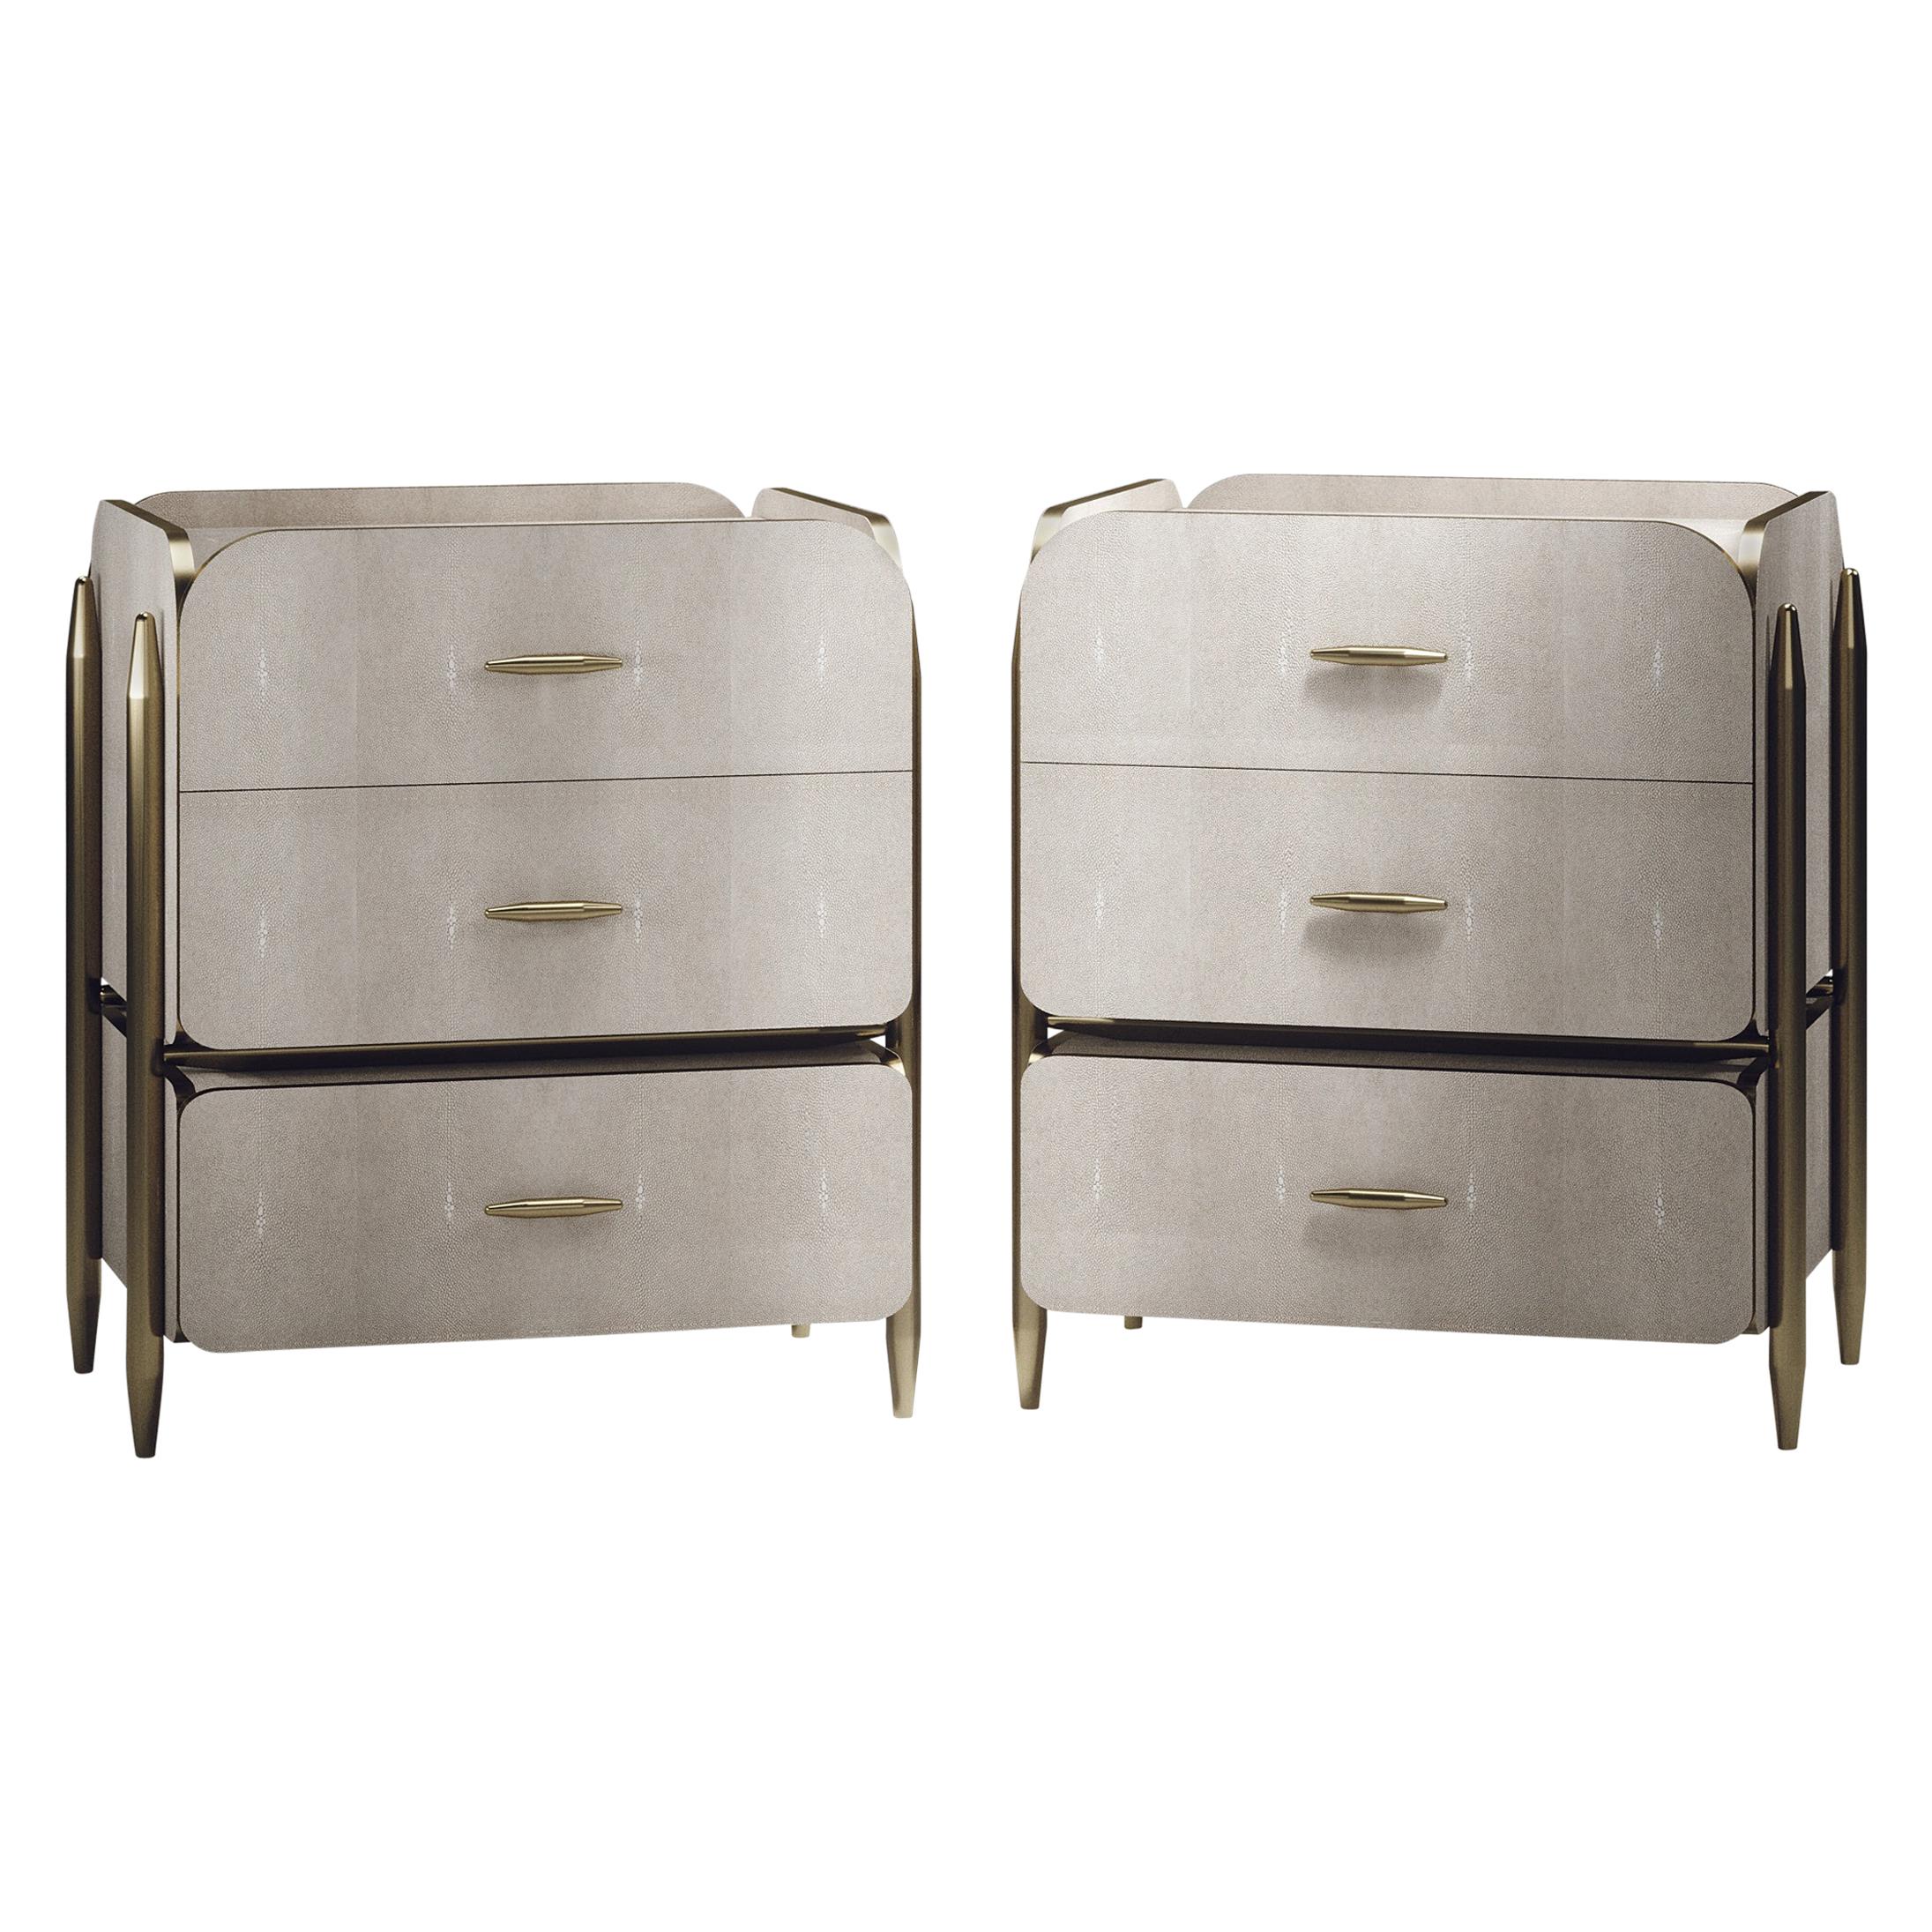 Pair of Shagreen Night Stands with Brass Accents by Kifu Paris For Sale